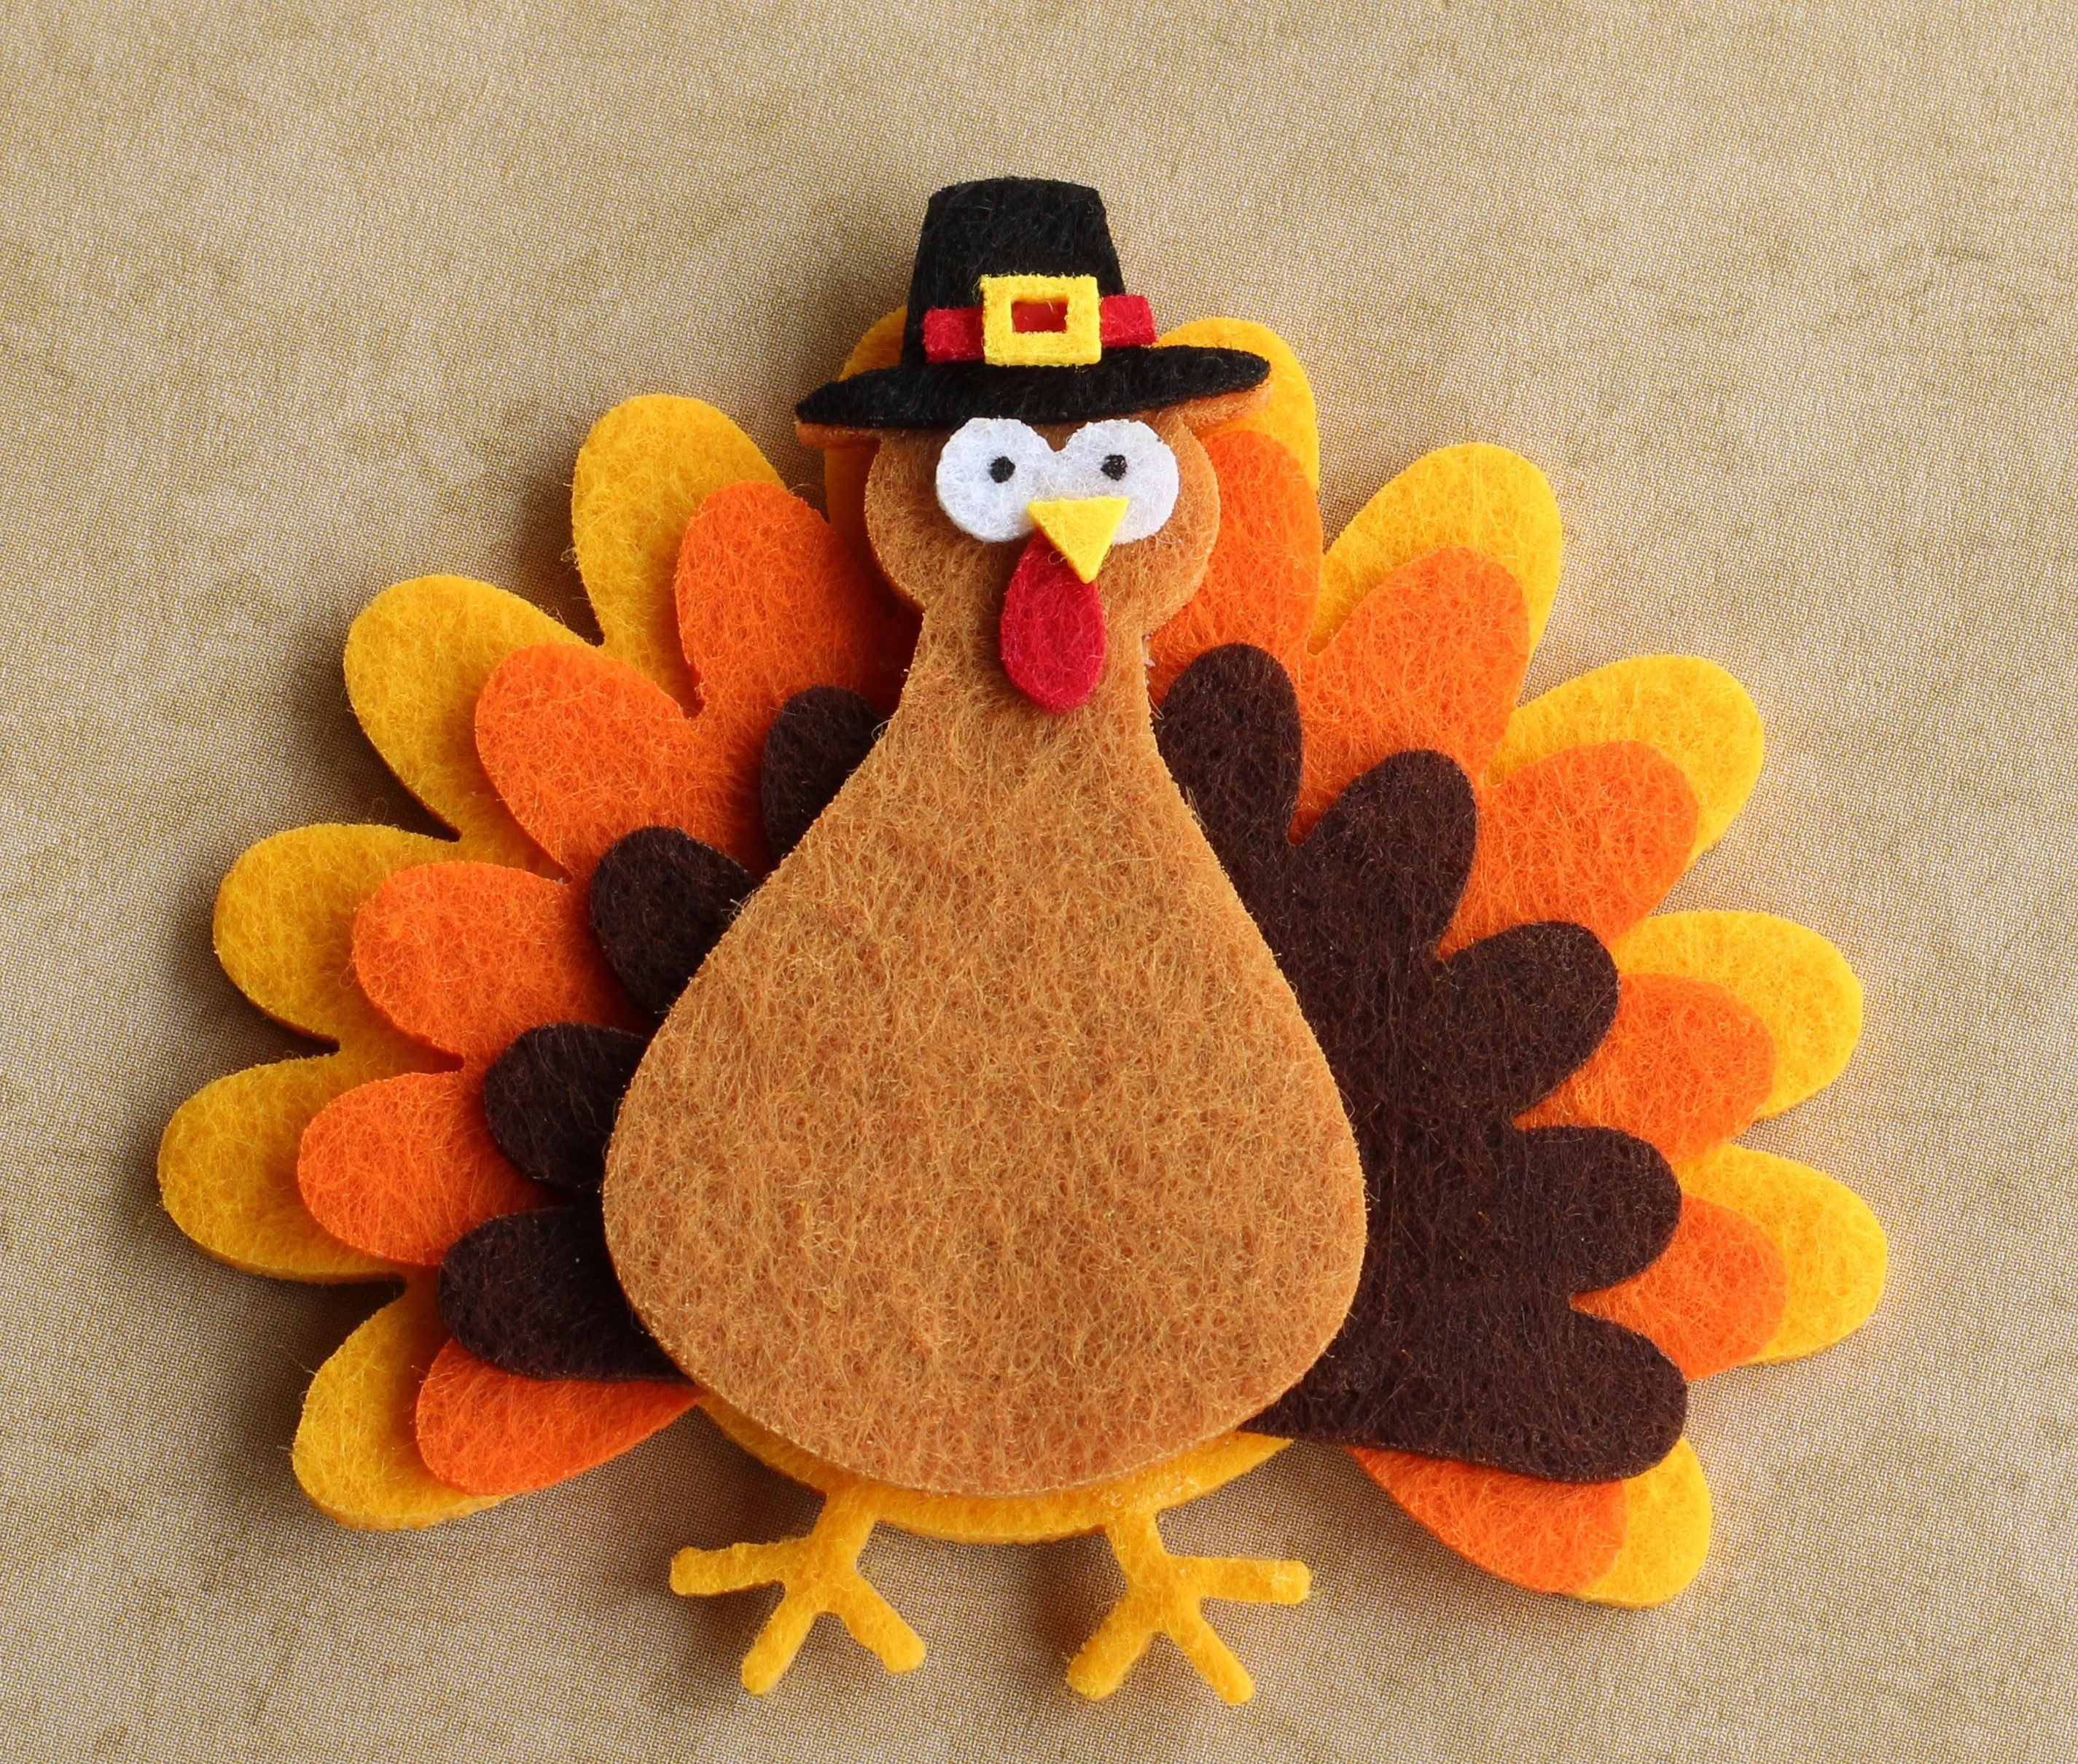 Felt turkey laying flat on a tan background with copy space